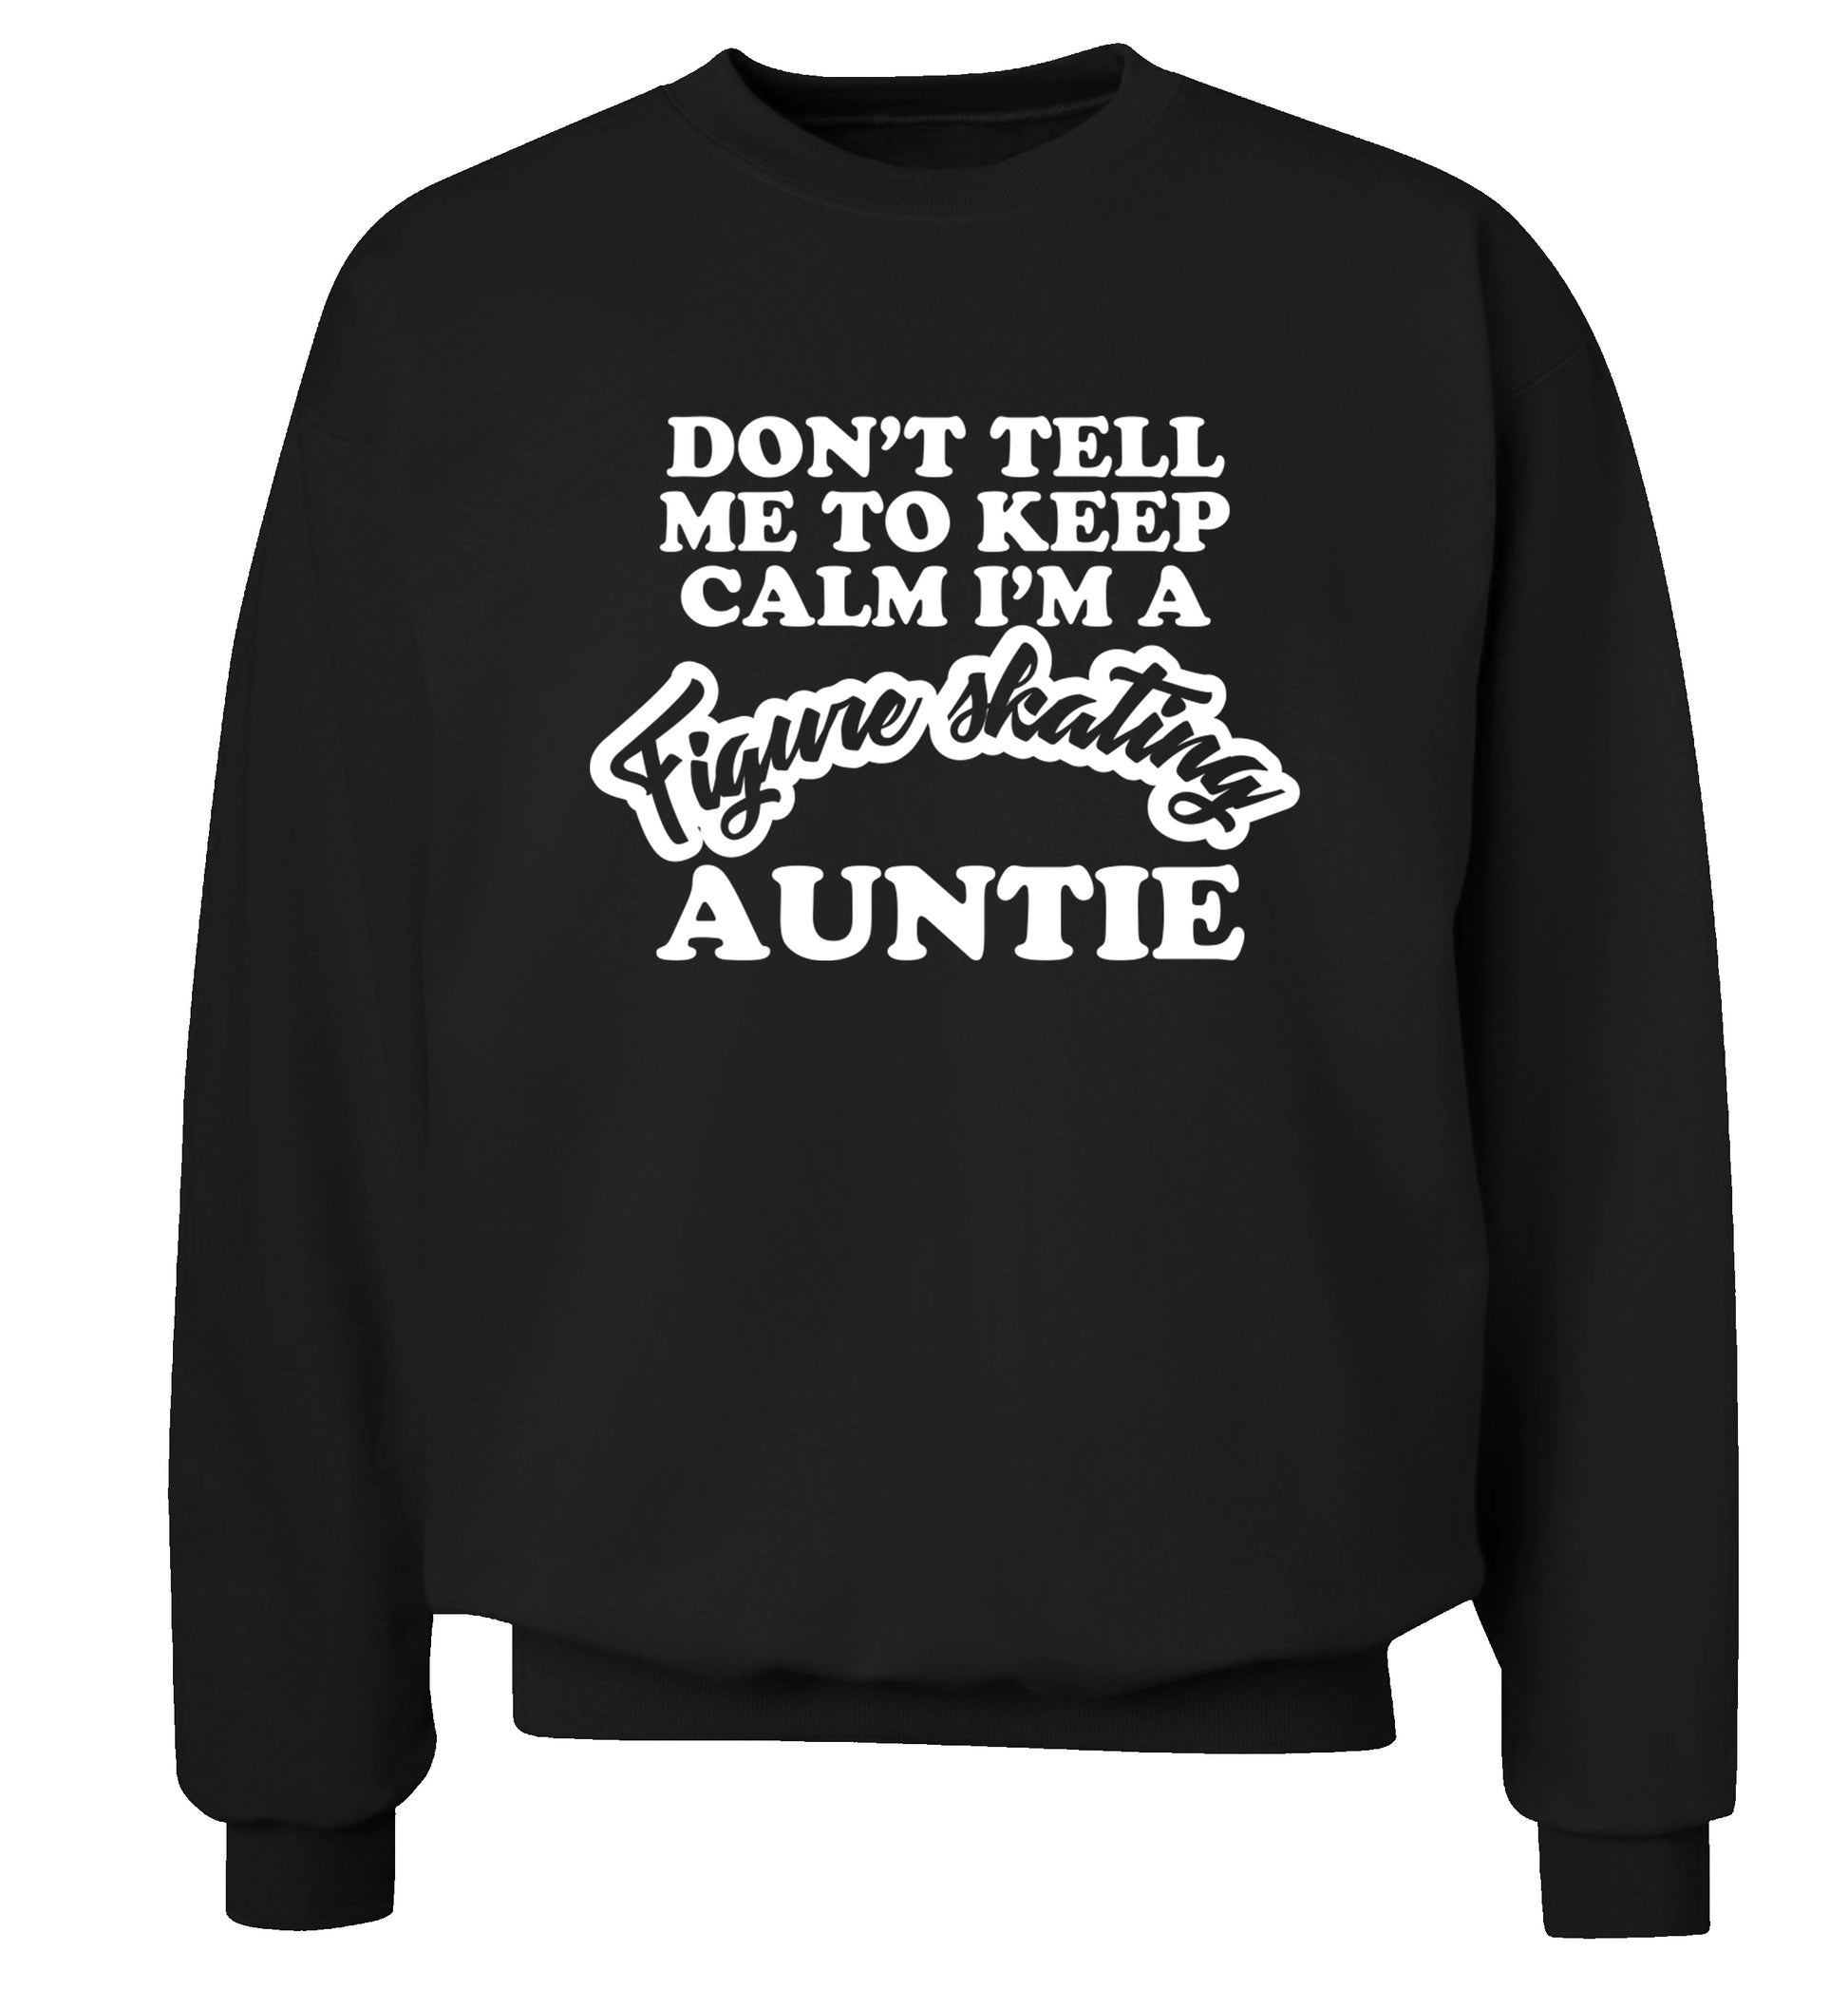 Don't tell me to keep calm I'm a figure skating auntie Adult's unisexblack Sweater 2XL